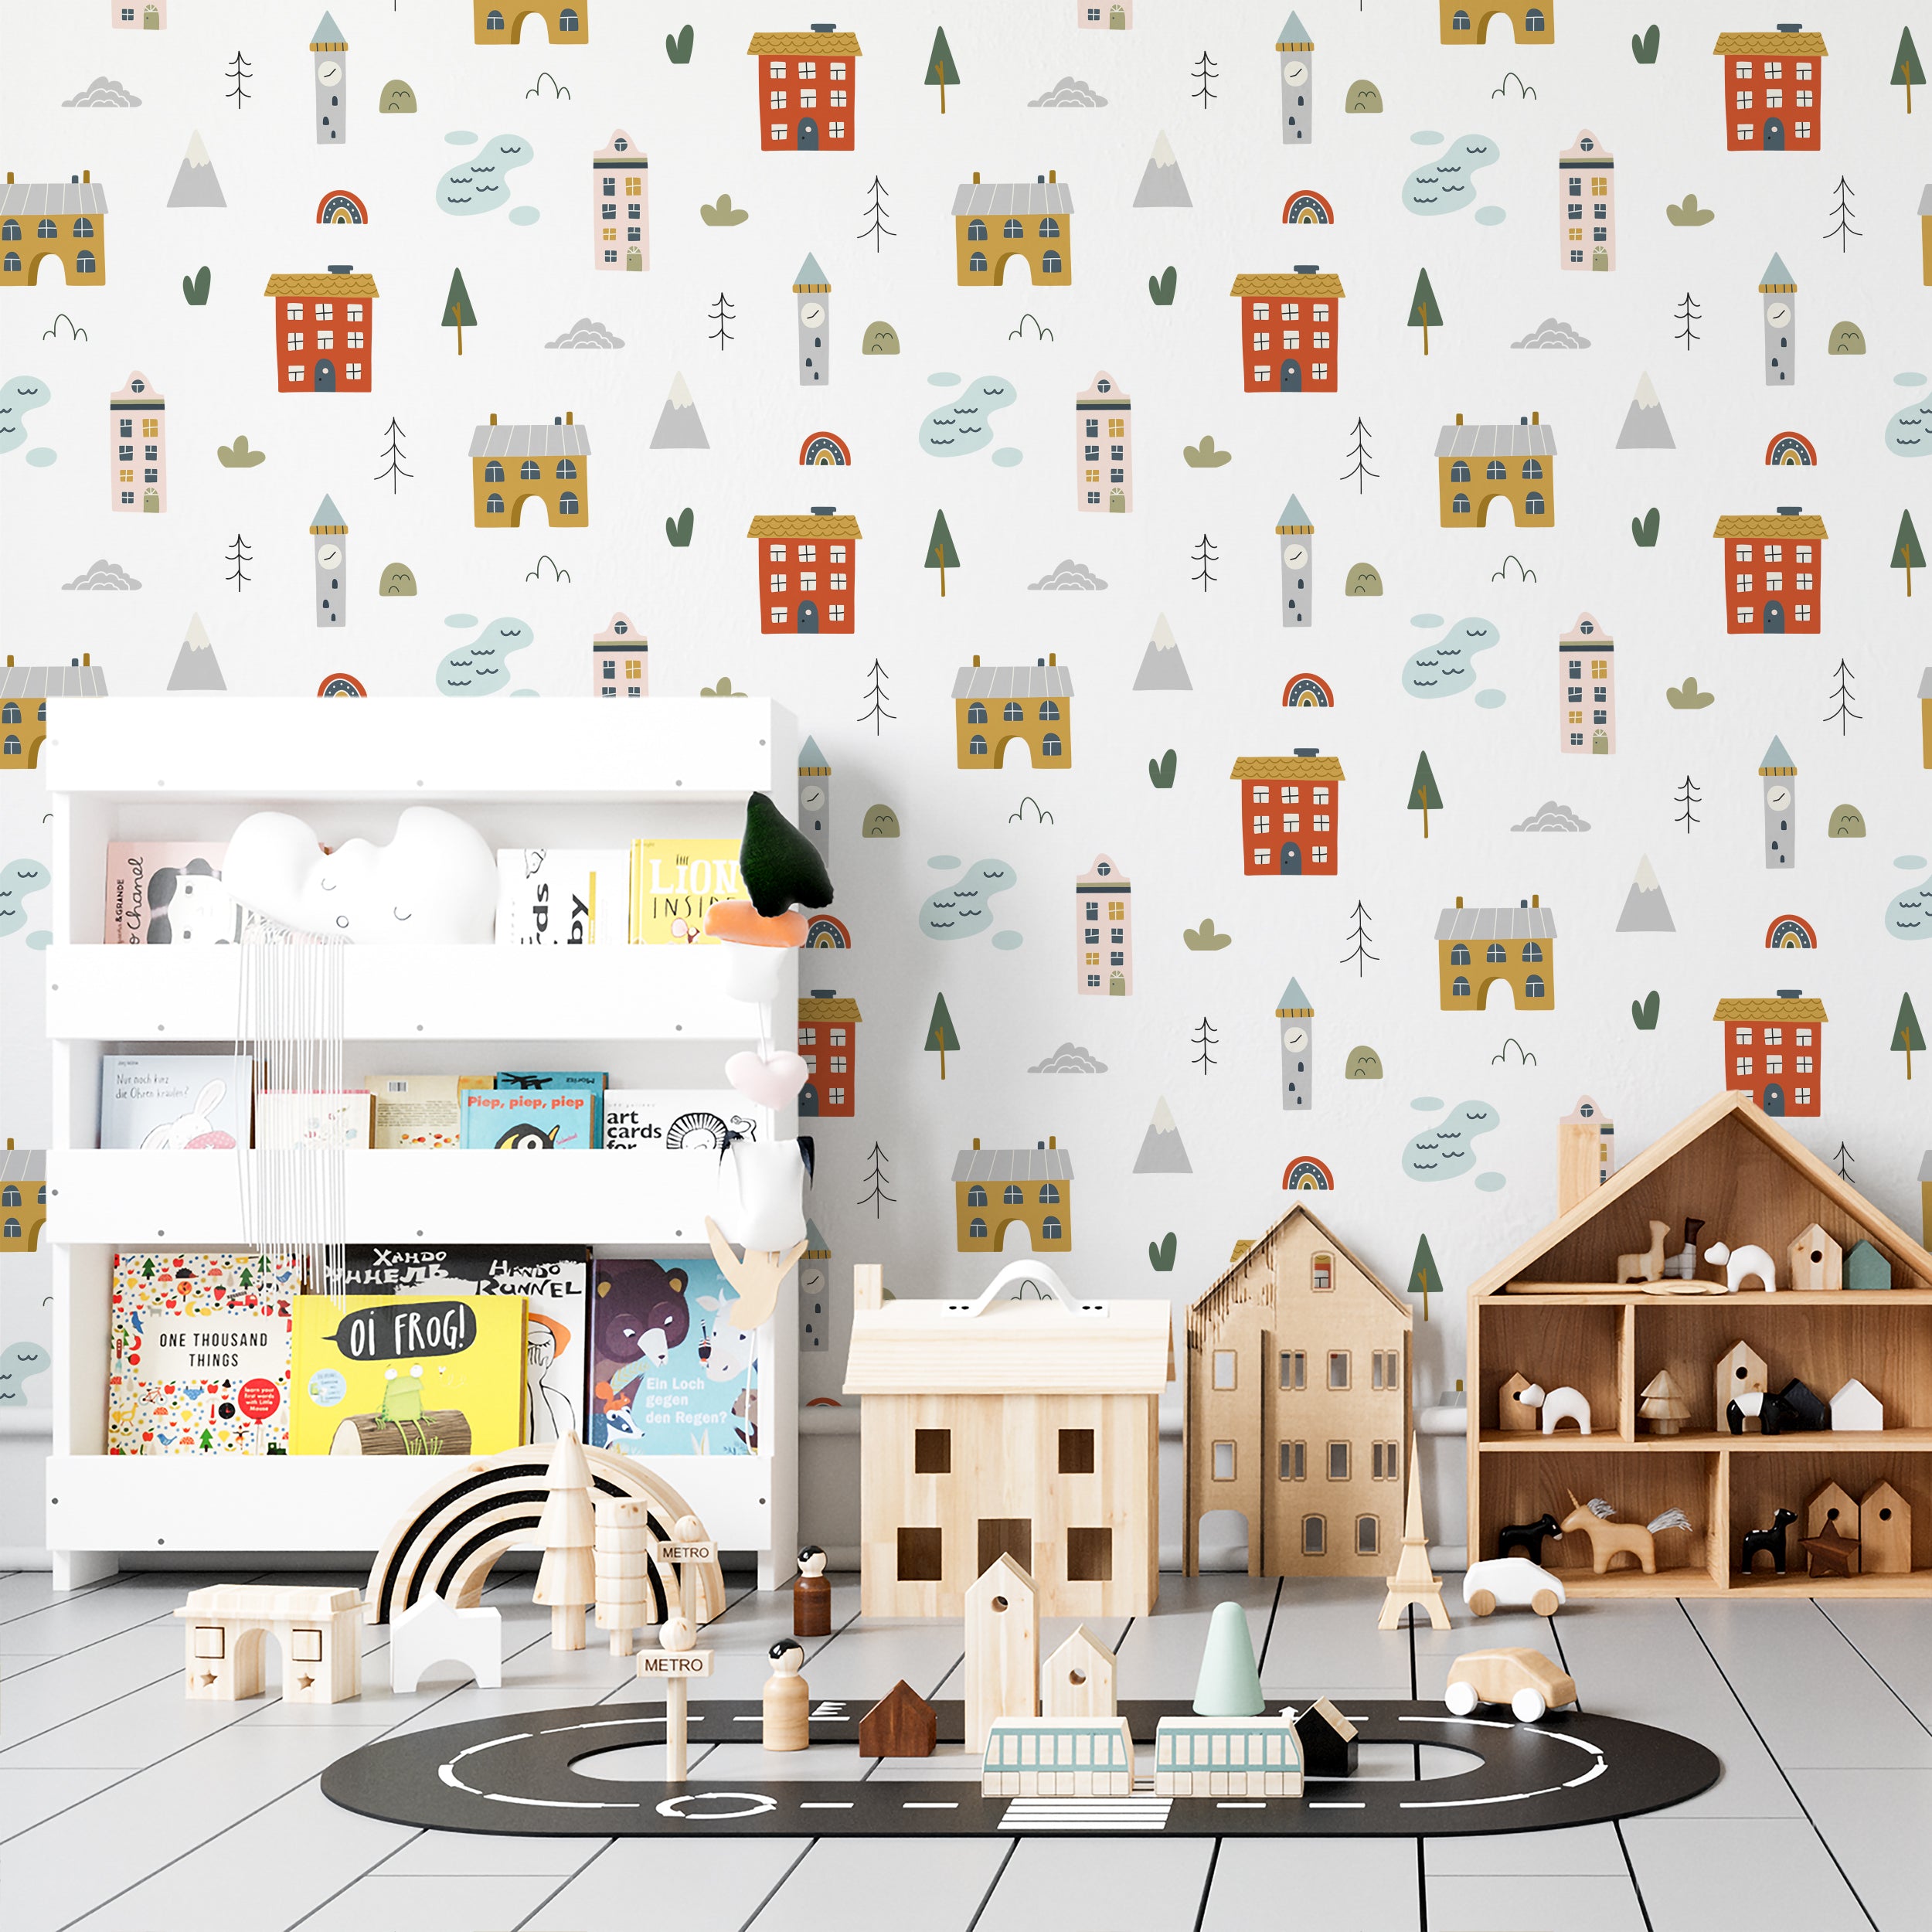 Room decor using Cute Town Wallpaper with a lively town scene including buildings and nature elements, displayed behind a children's play area with wooden toys and a house-shaped shelf, enhancing a creative and playful environment